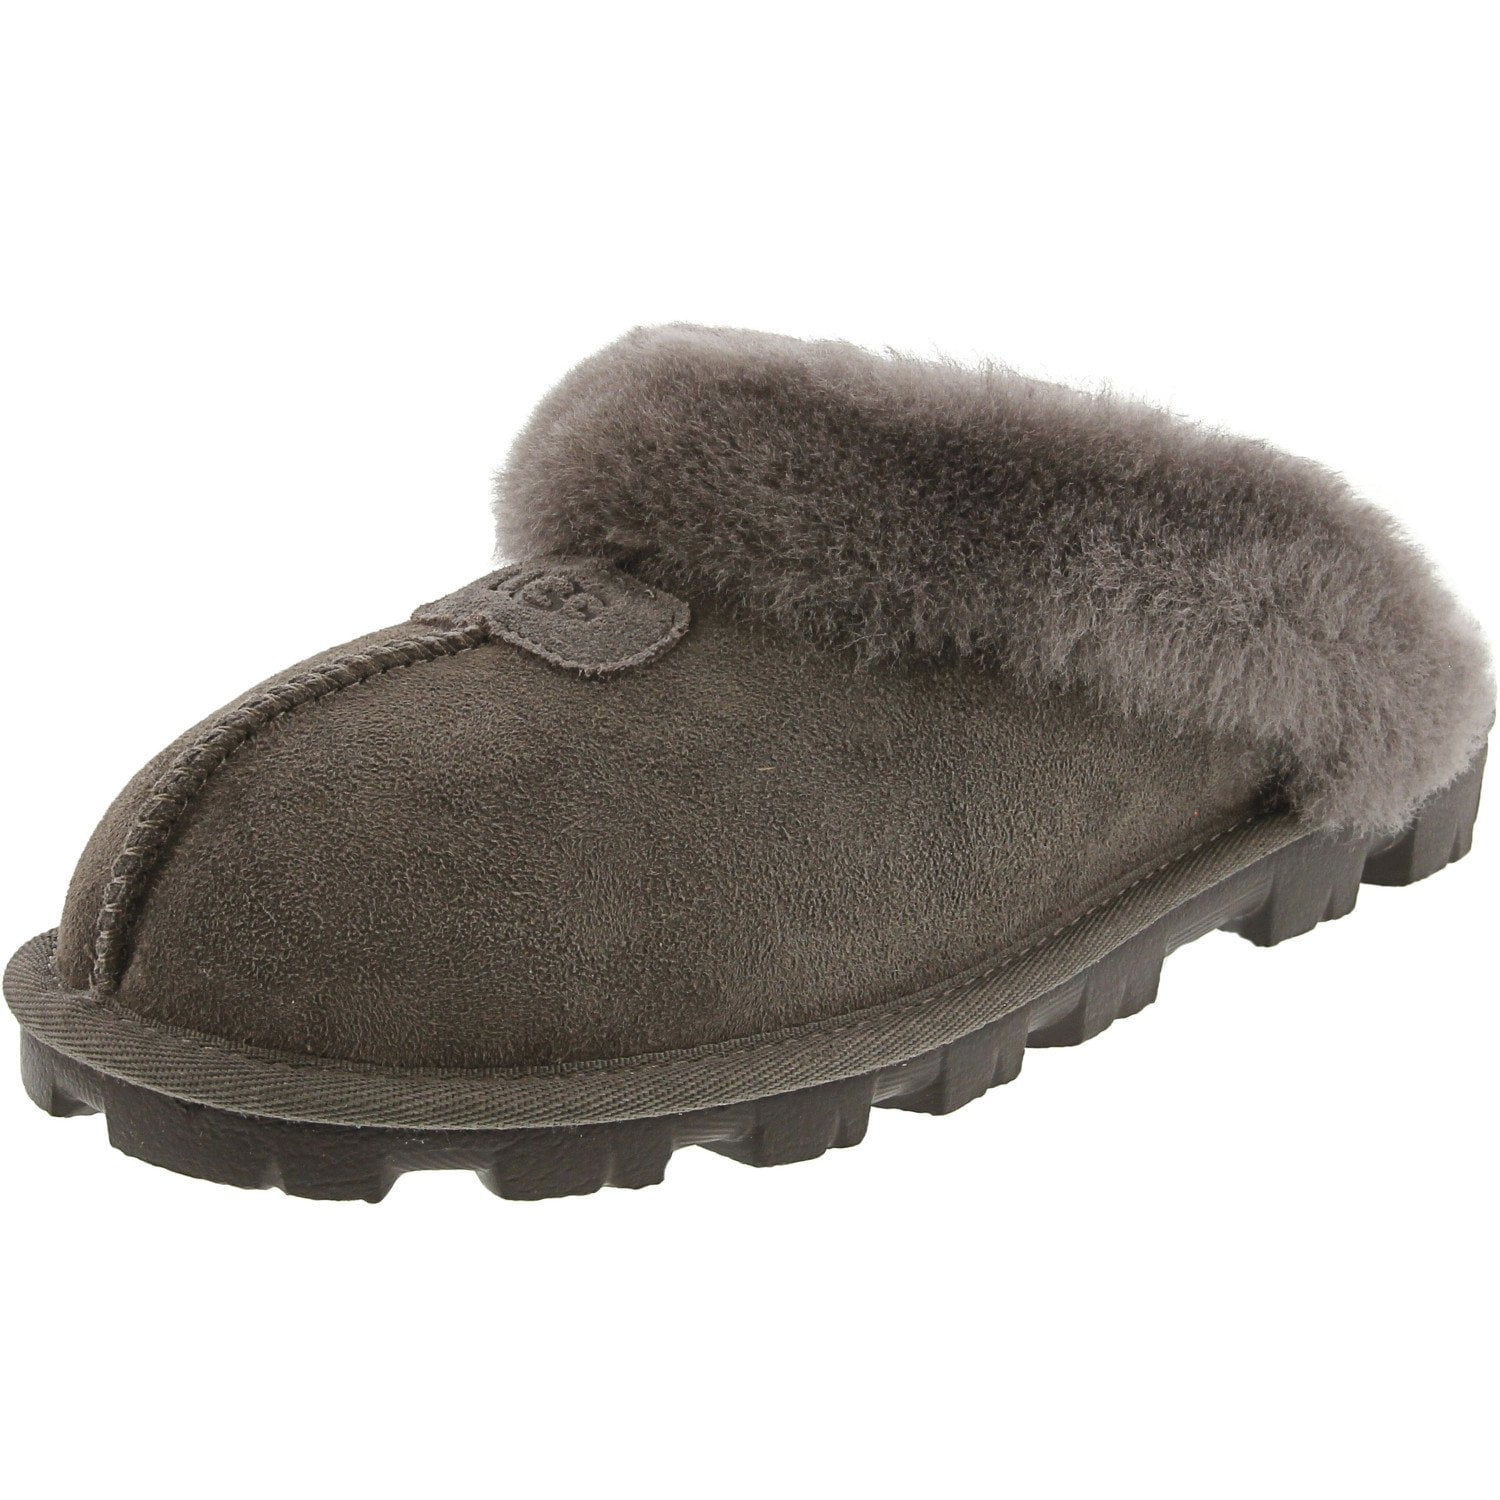 womens size 8 ugg slippers